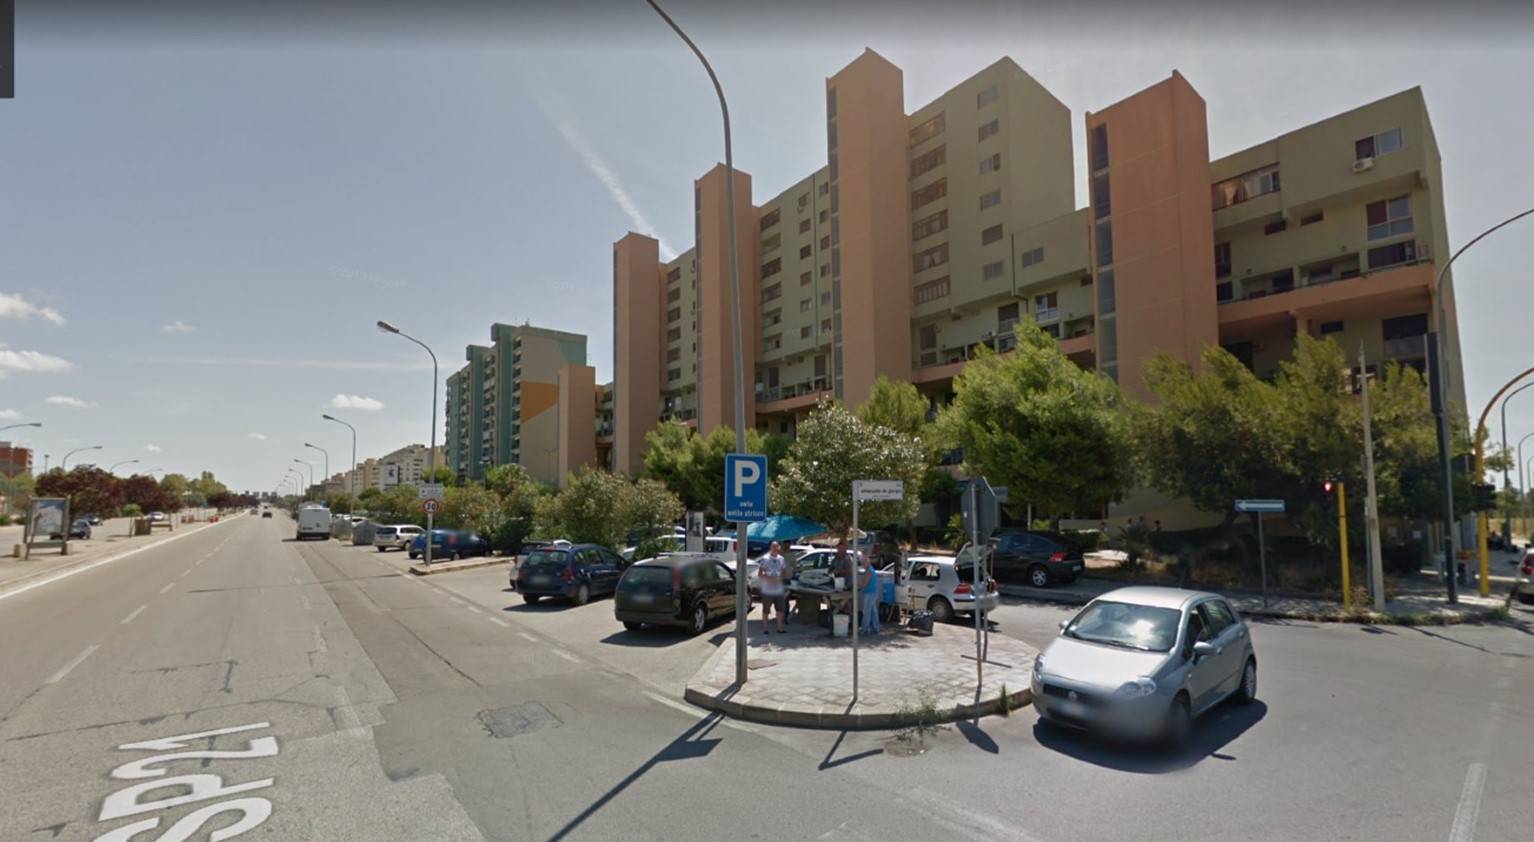 Q.RE PAOLO VI, TARANTO, Apartment for sale of 121 Sq. mt., Good condition, Heating Individual heating system, Energetic class: F, Epi: 66,199 kwh/m2 